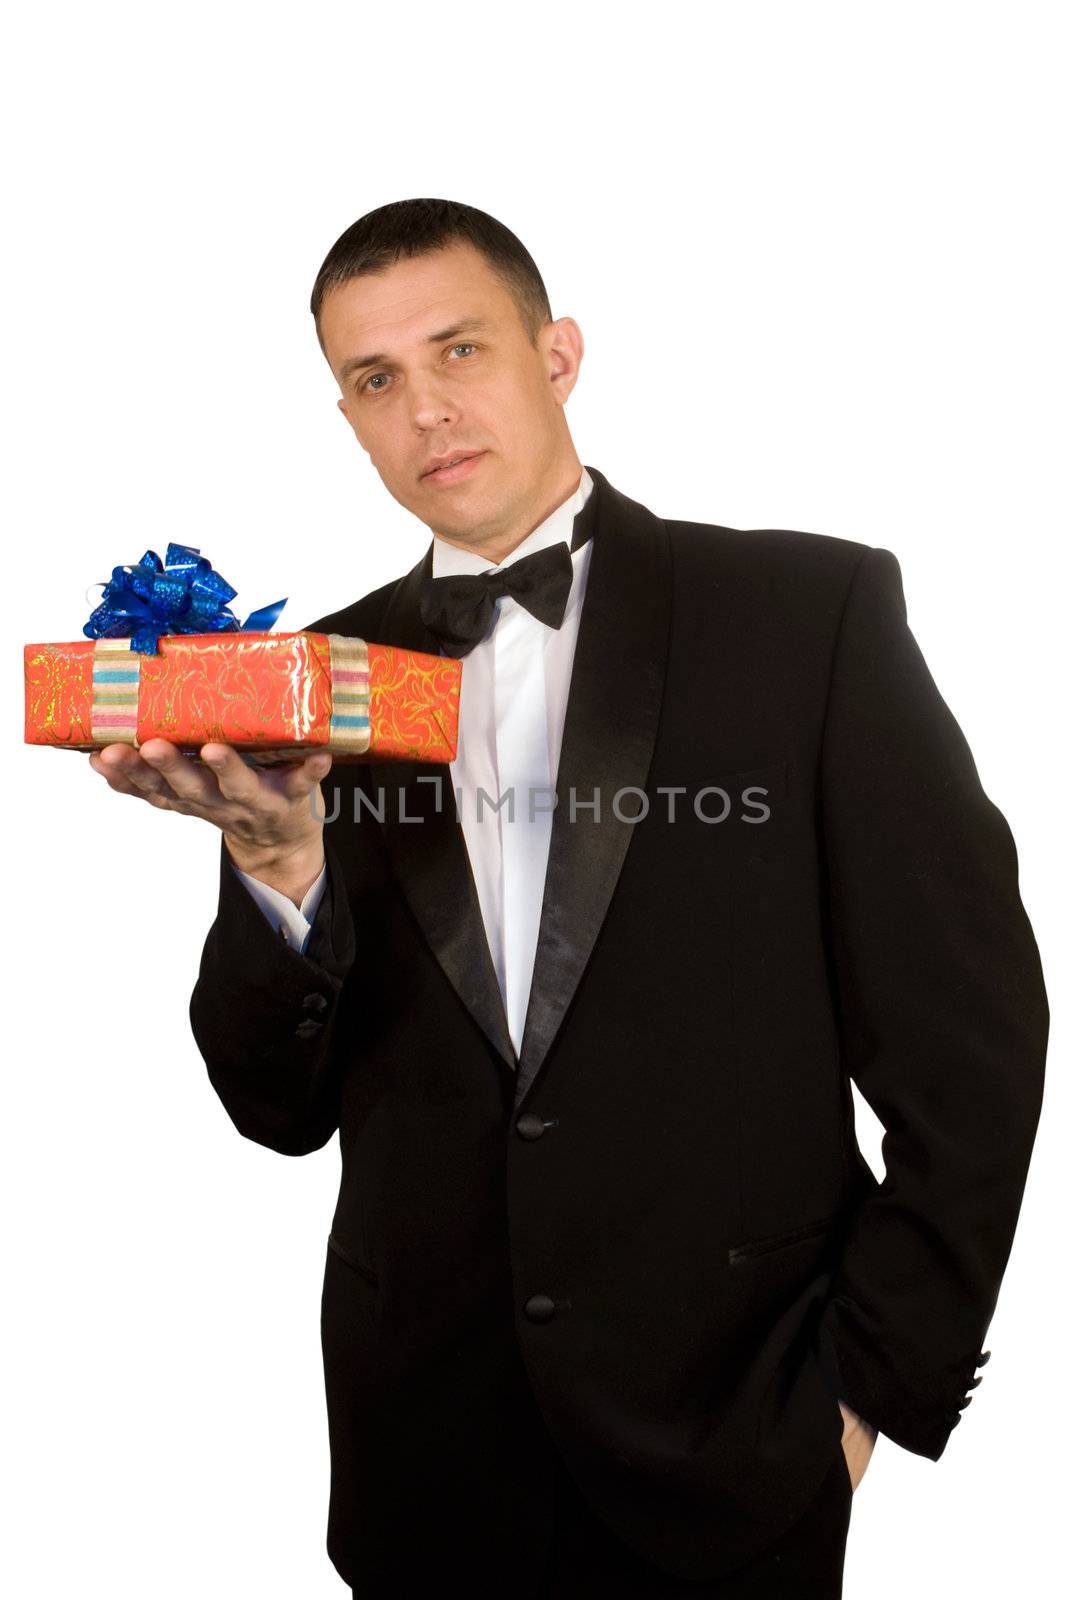 The man likes to give gifts for a holiday